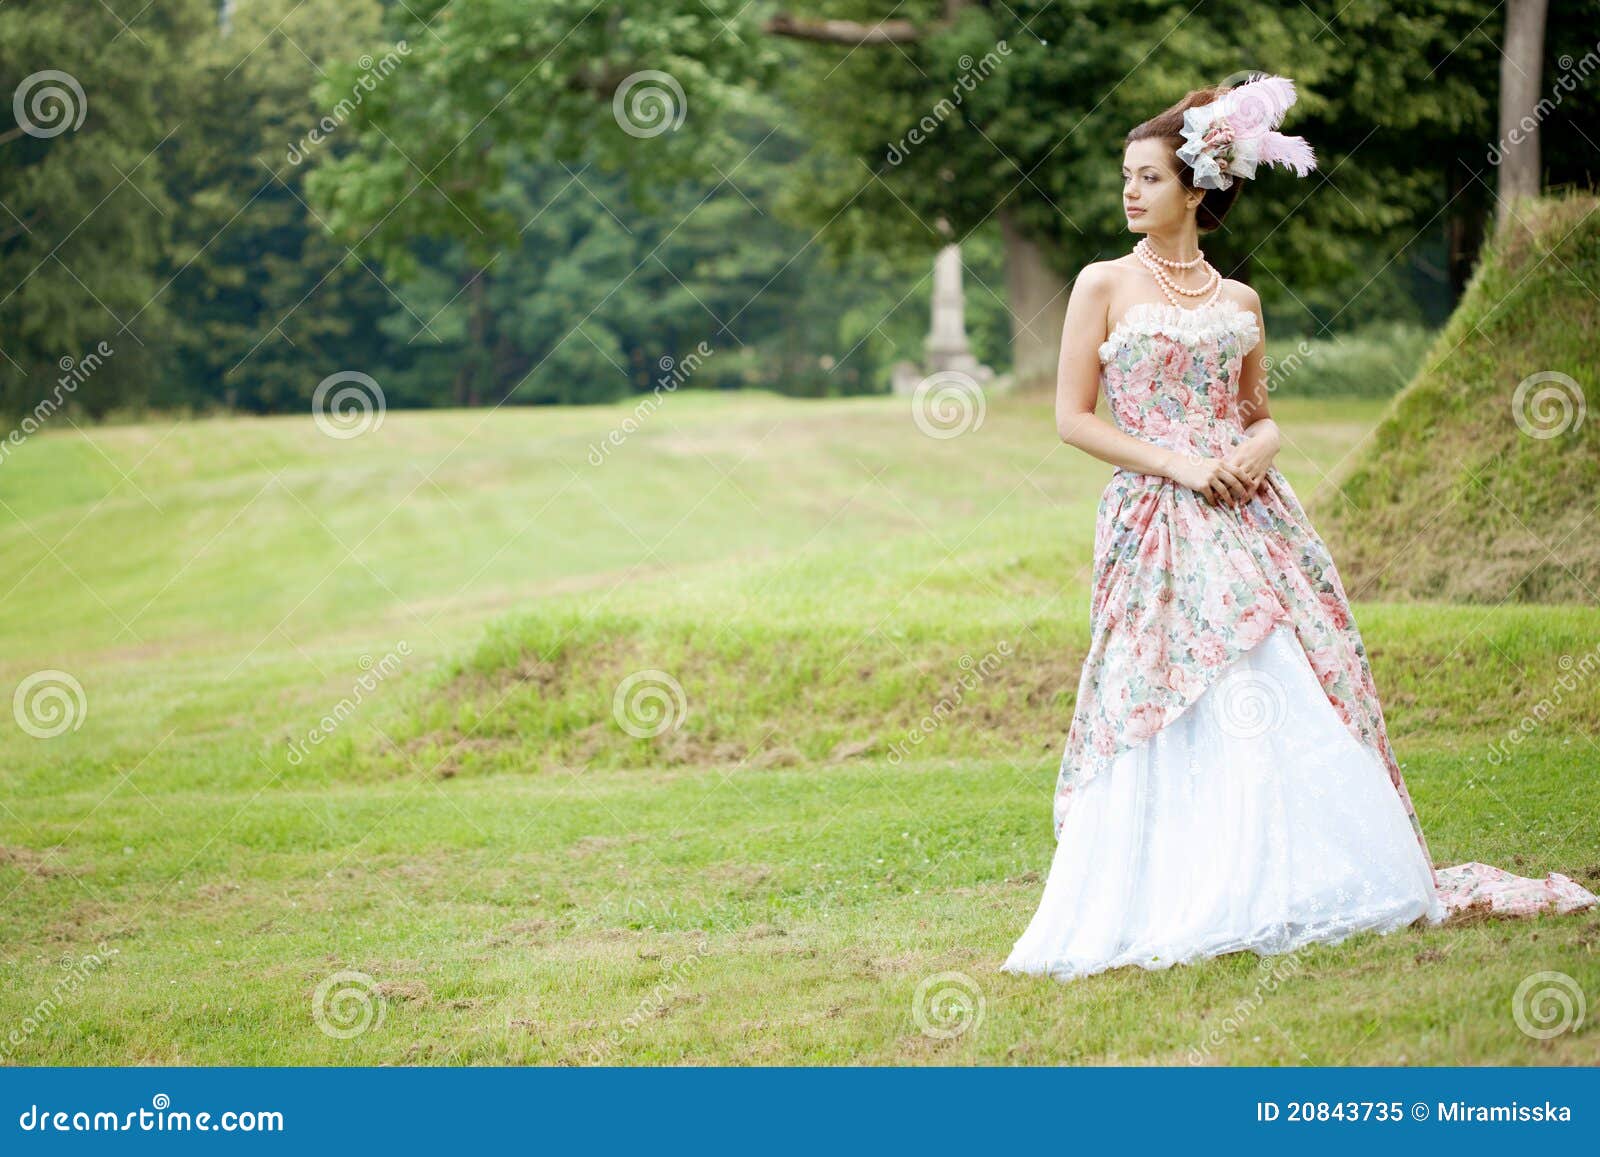 577,518 Dress Nature Stock - Free & Royalty-Free Stock Photos from Dreamstime